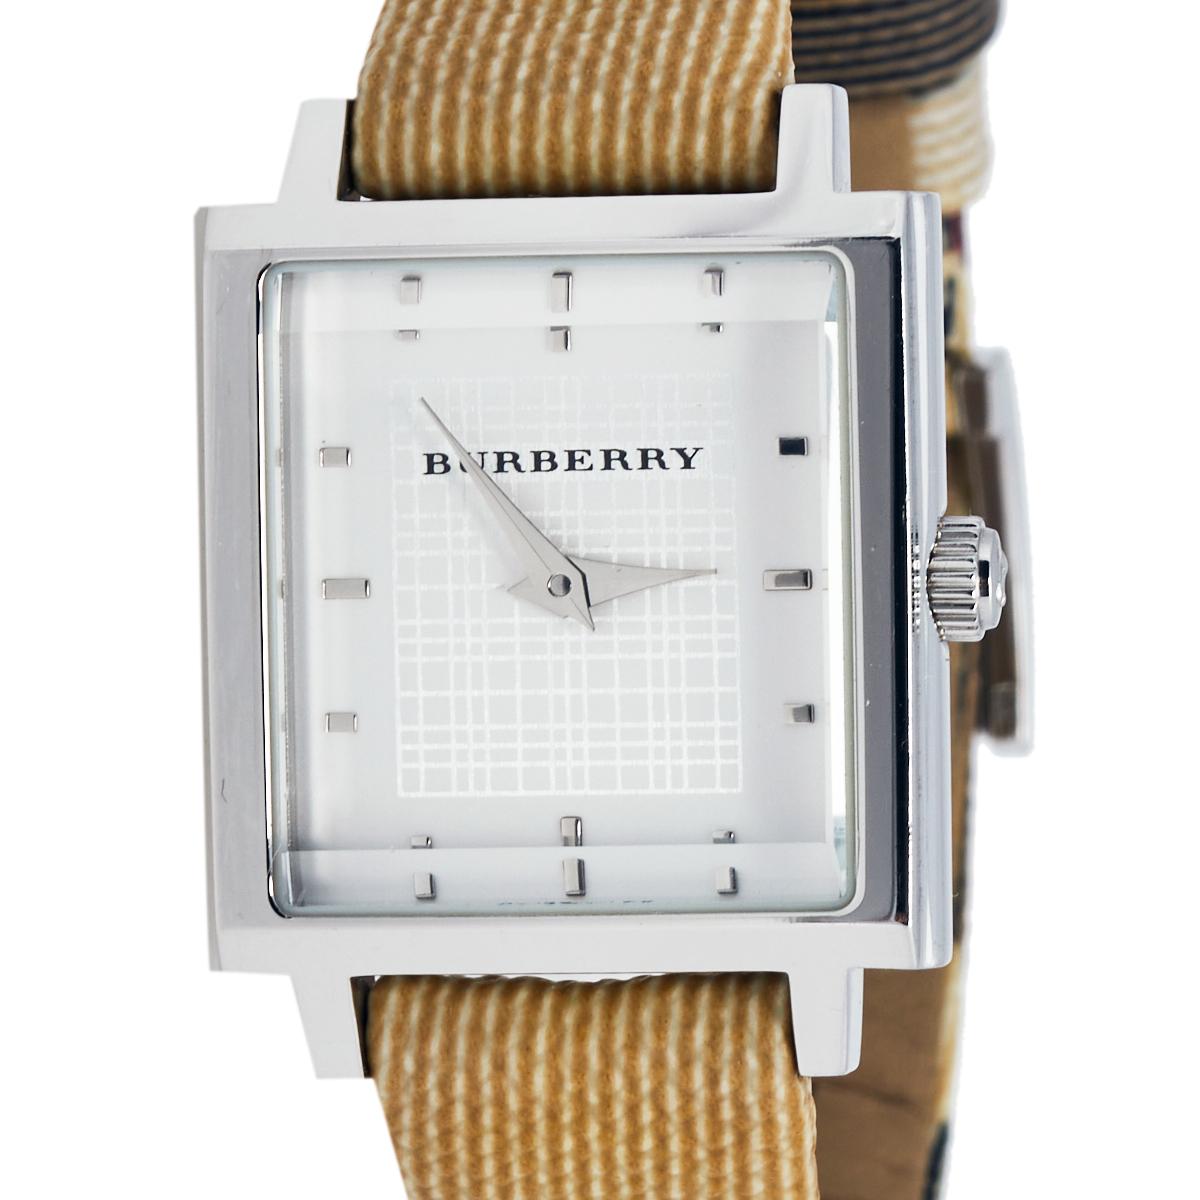 Designed by the house of Burberry, this watch features a stainless steel case with a diameter of 24 mm. It features a silver, checked dial with silver-tone hands, markers, and the brand label. Powered by a quartz movement, this watch comes fitted